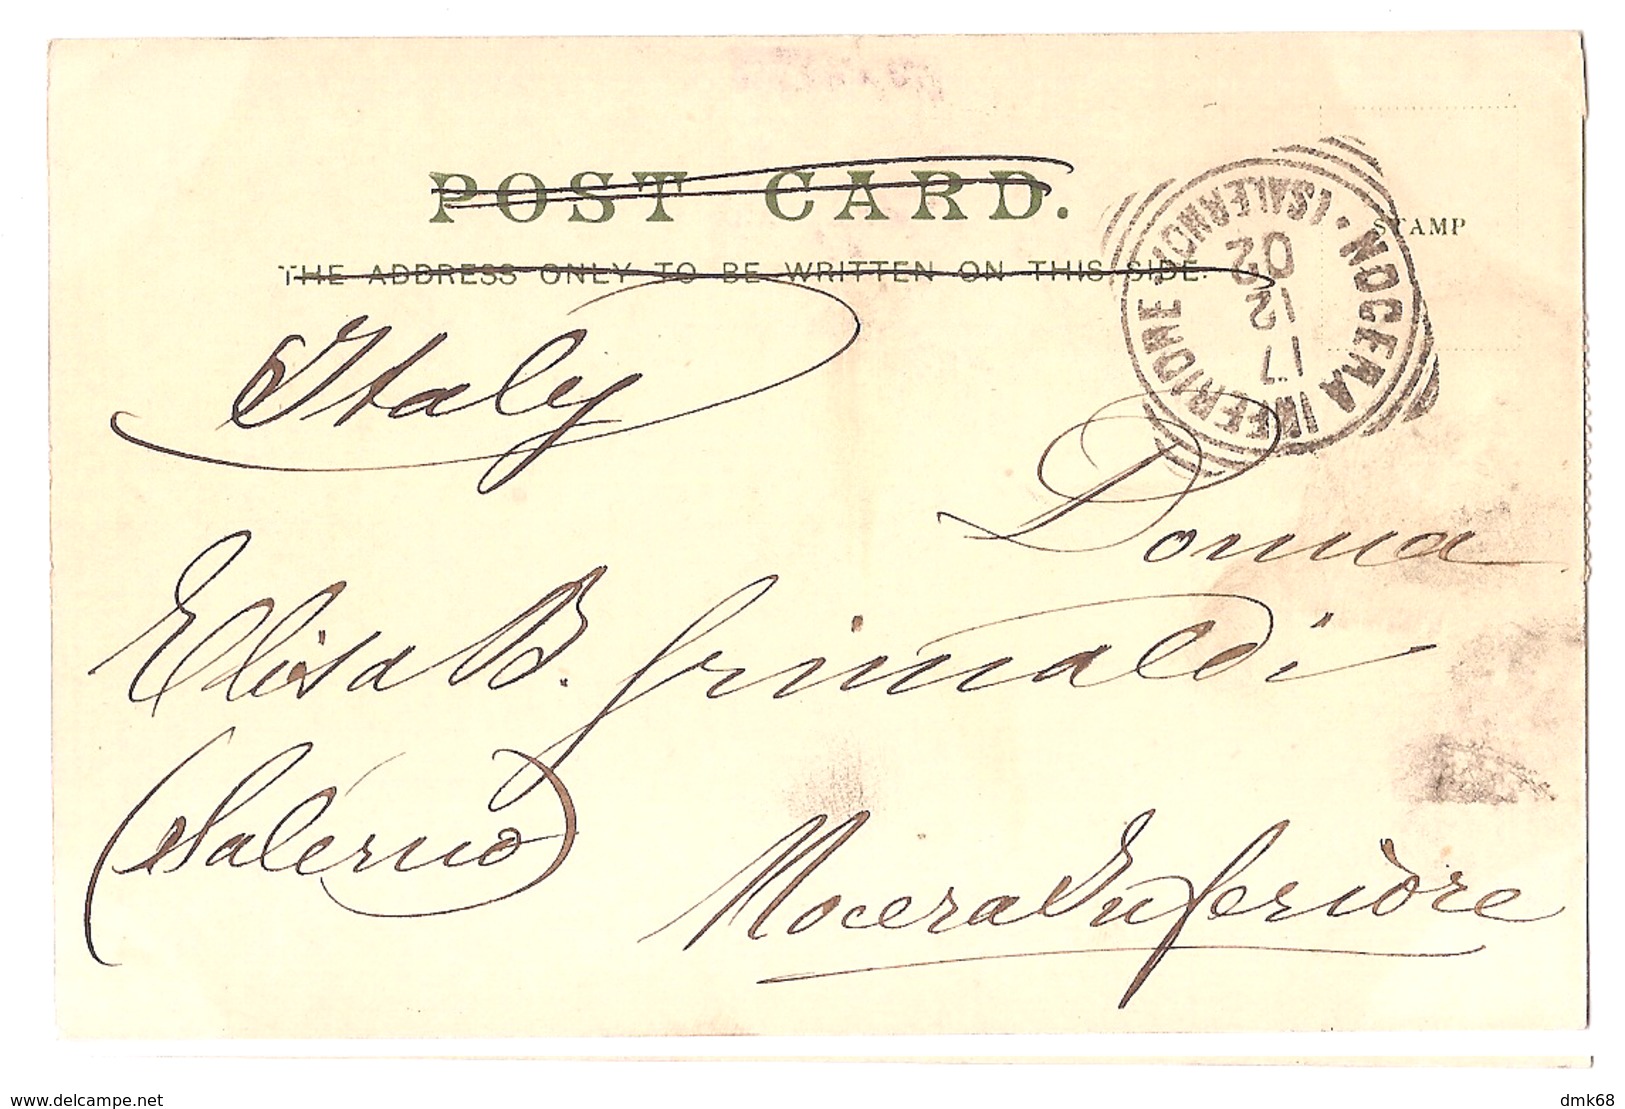 SOUTH AFRICA - PORT ELIZABETH - DONKIN MONUMENT AND RESERVE - STAMP - MAILED TO ITALY 1902 - ( 2782) - Afrique Du Sud